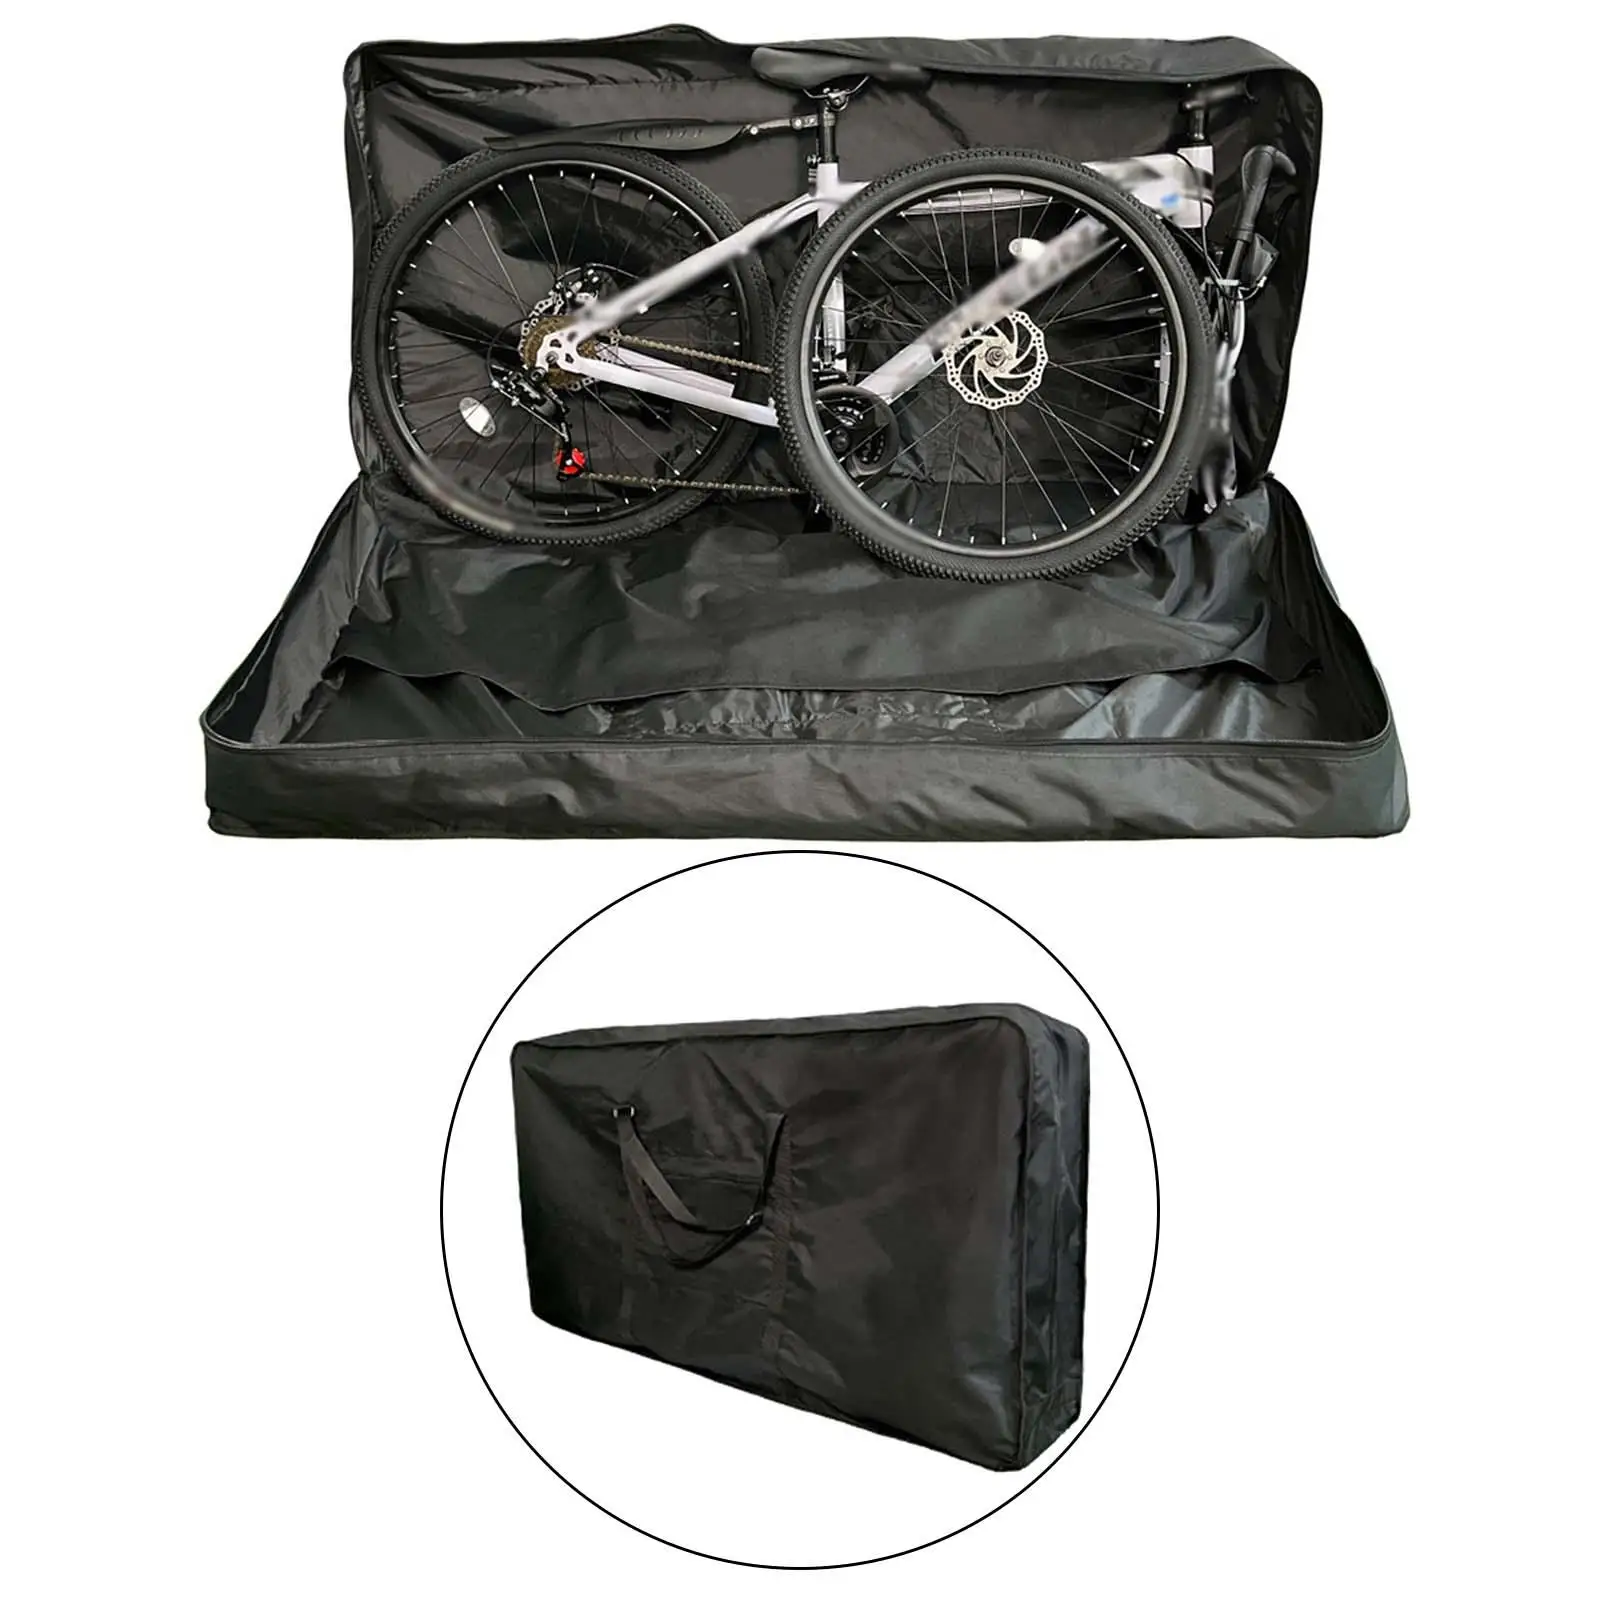 

Foldable Bike Carry Bag Waterproof Professional with Zipper Protective Bicycle Transport Case for Train Plane Trip Shipping Car